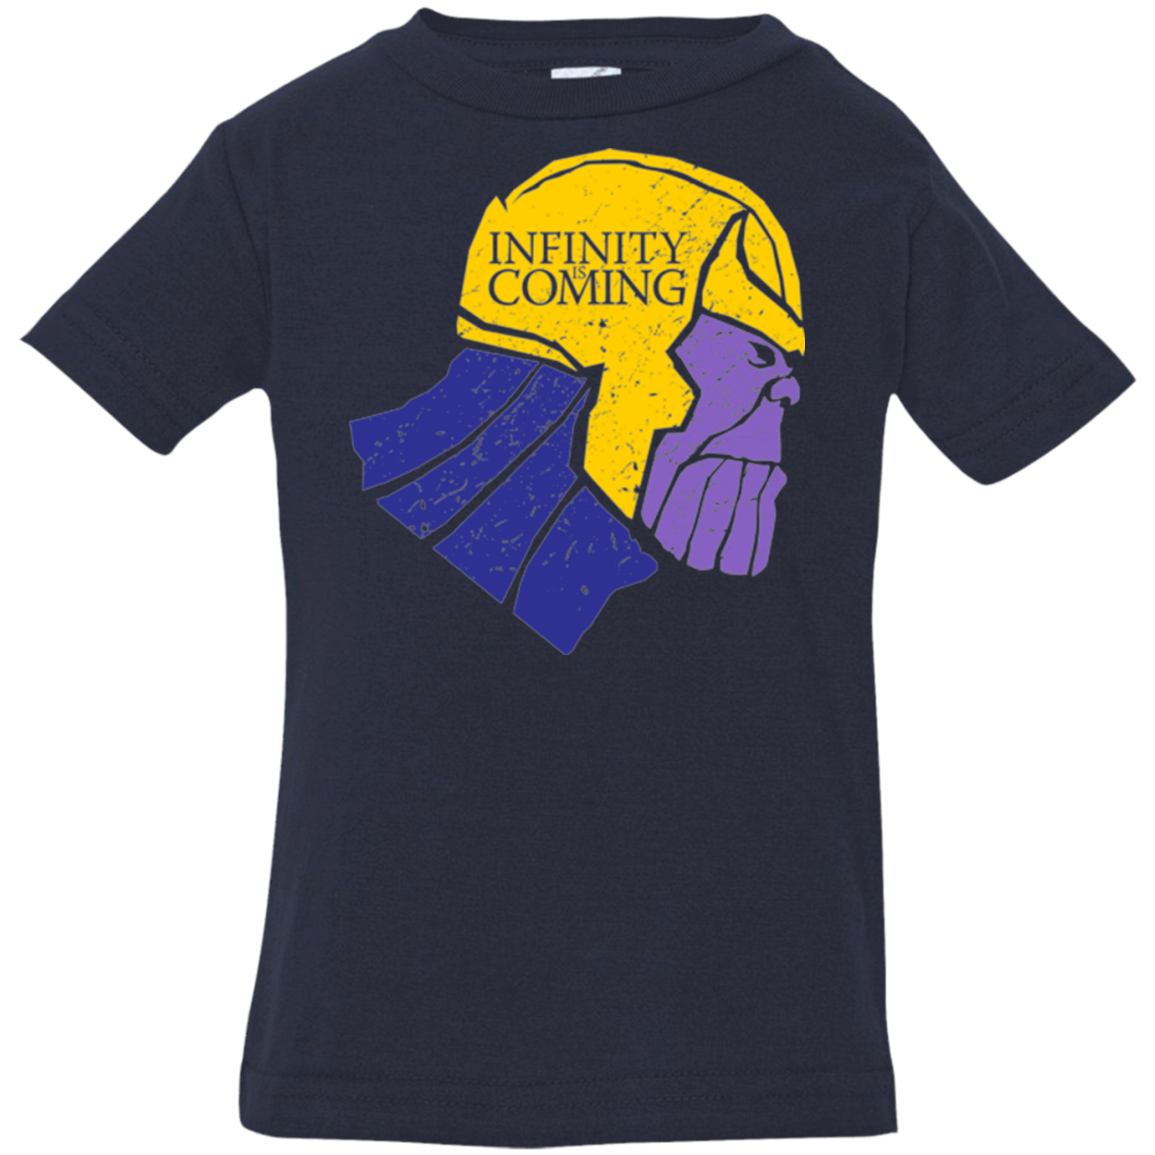 Infinity is Coming Infant Premium T-Shirt